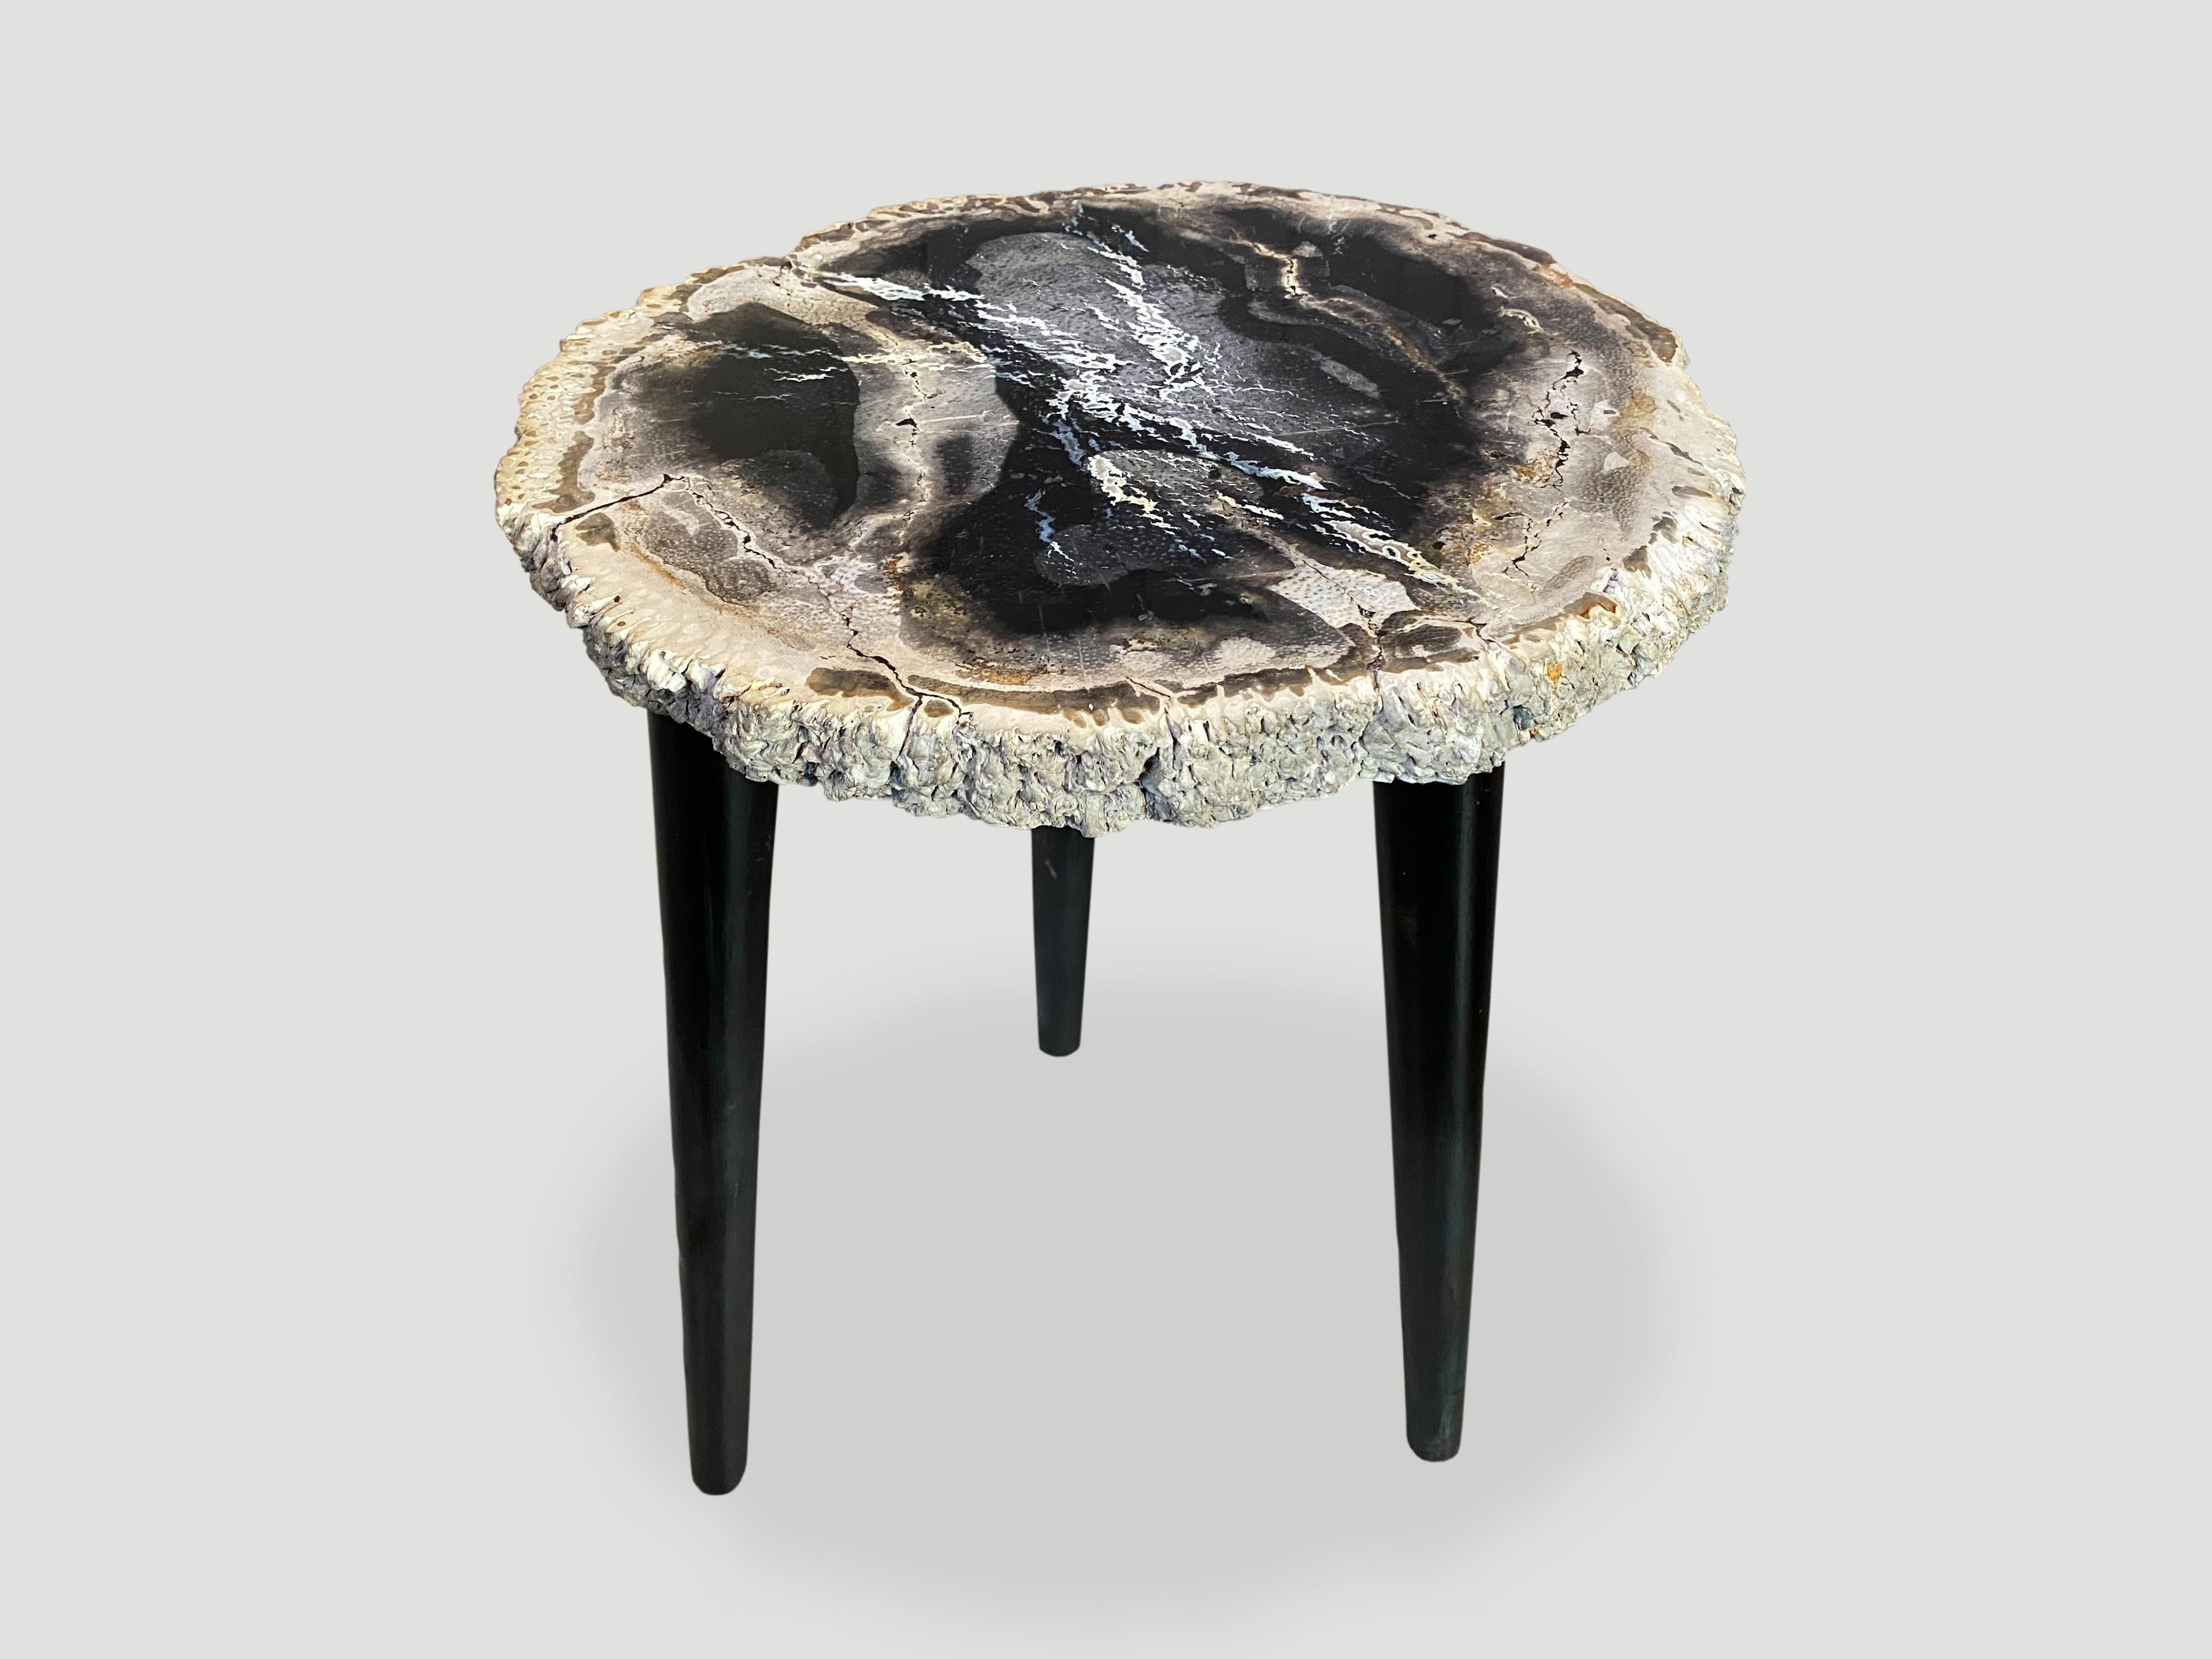 Beautiful contrasting colors on this stunning palm petrified wood slab top side table. Rare grey, blue and white palm top is resting on a midcentury style metal base.

It’s fascinating how Mother Nature produces these stunning 40 million year old